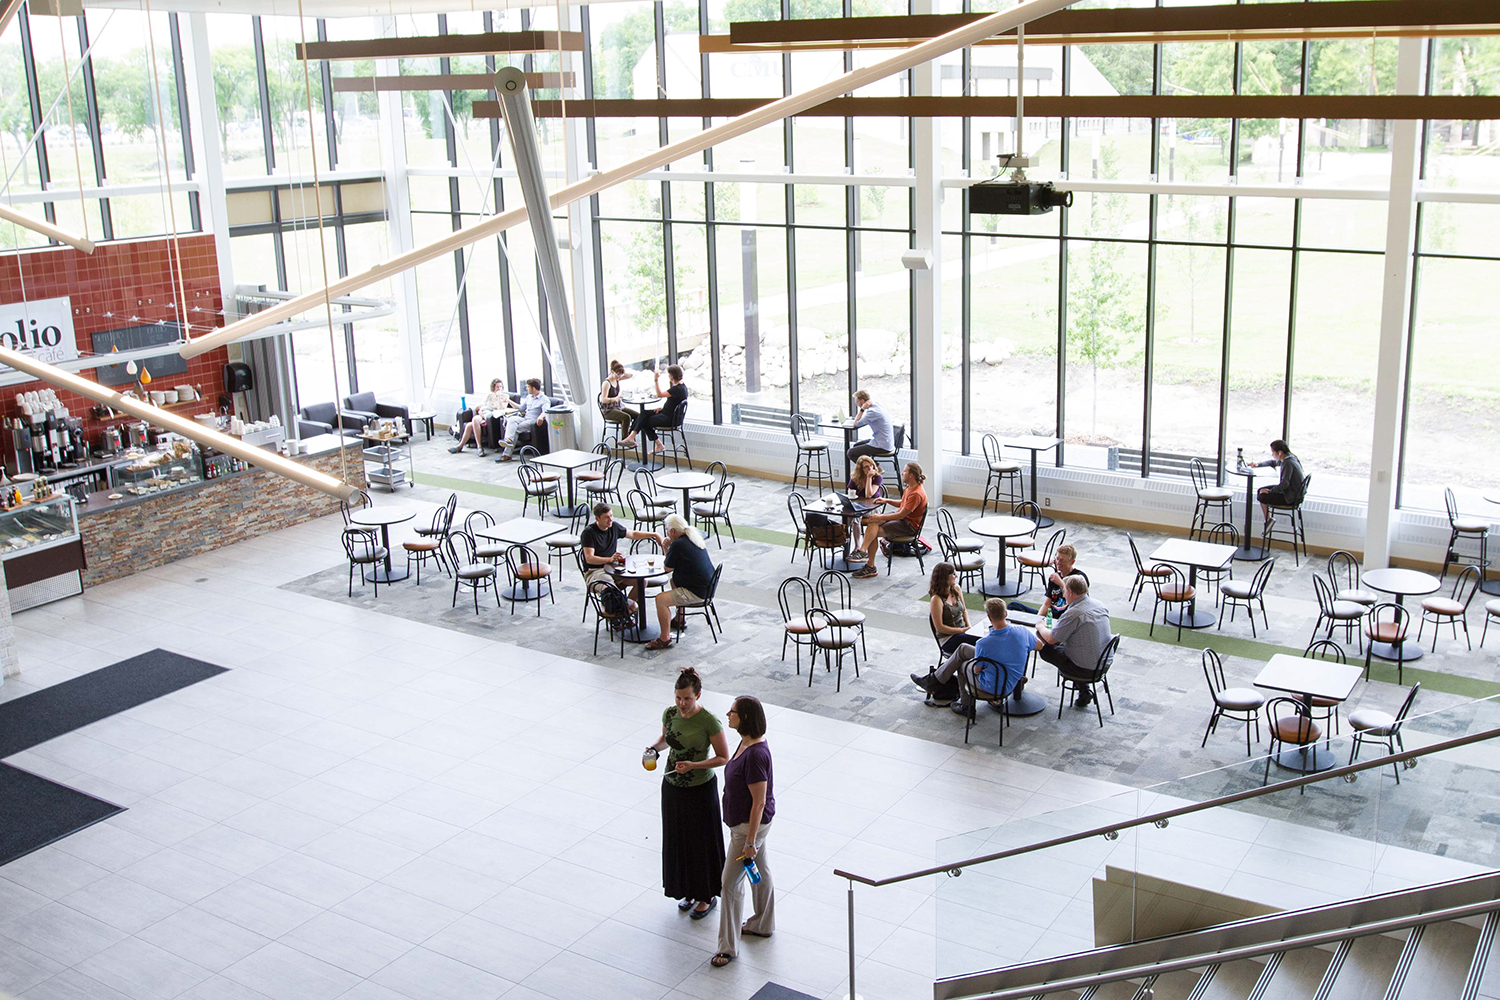 6 study tips — A view of Marpeck Commons from the Mezzanine level, down to the tables and chairs below, with Folio Cafe and the wall of glass letting in so much natural light.